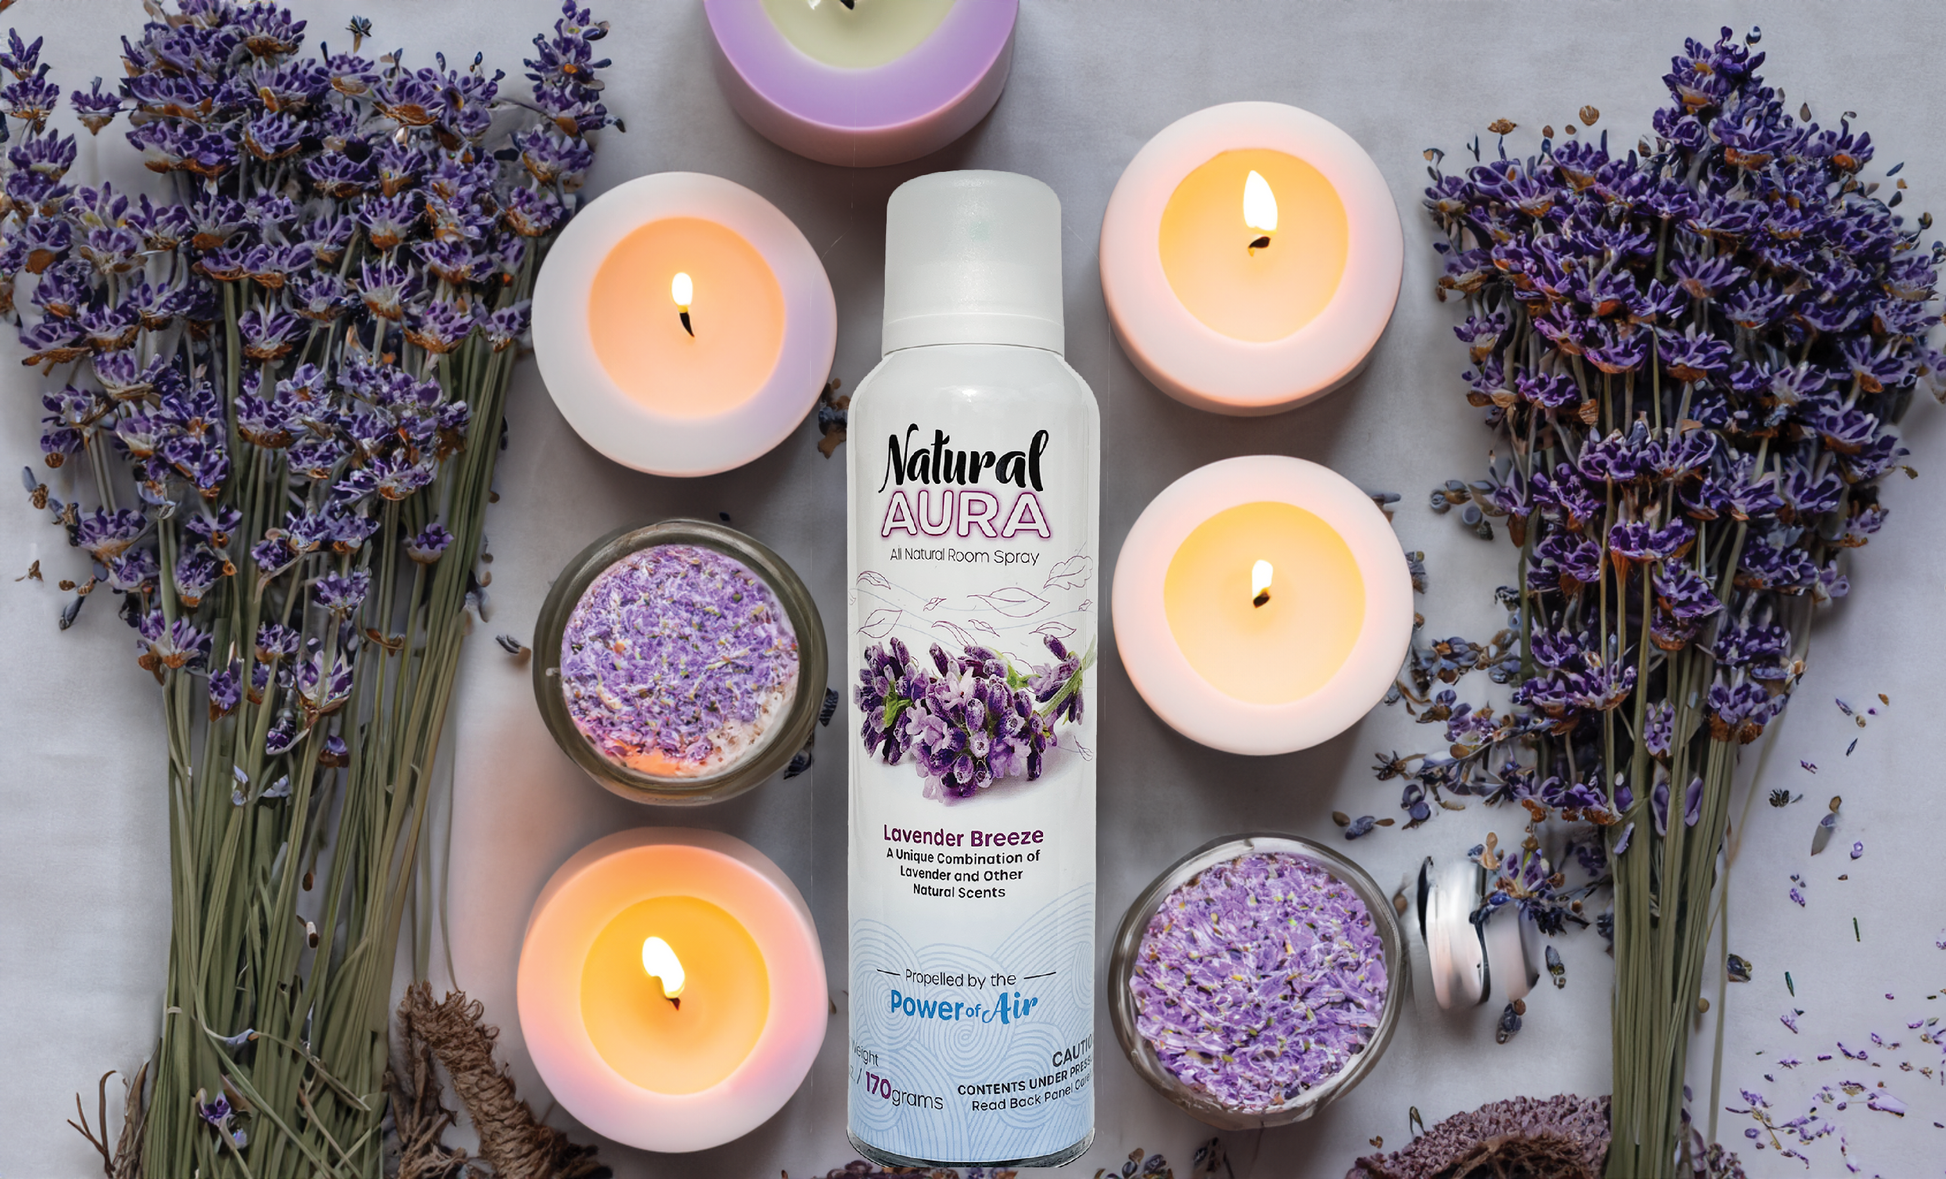 bottle of Natural Aura Lavender Breeze Room Spray laying down on a table surrounded by white and purple candles that are lit as well as lavender flowers laying on the table.